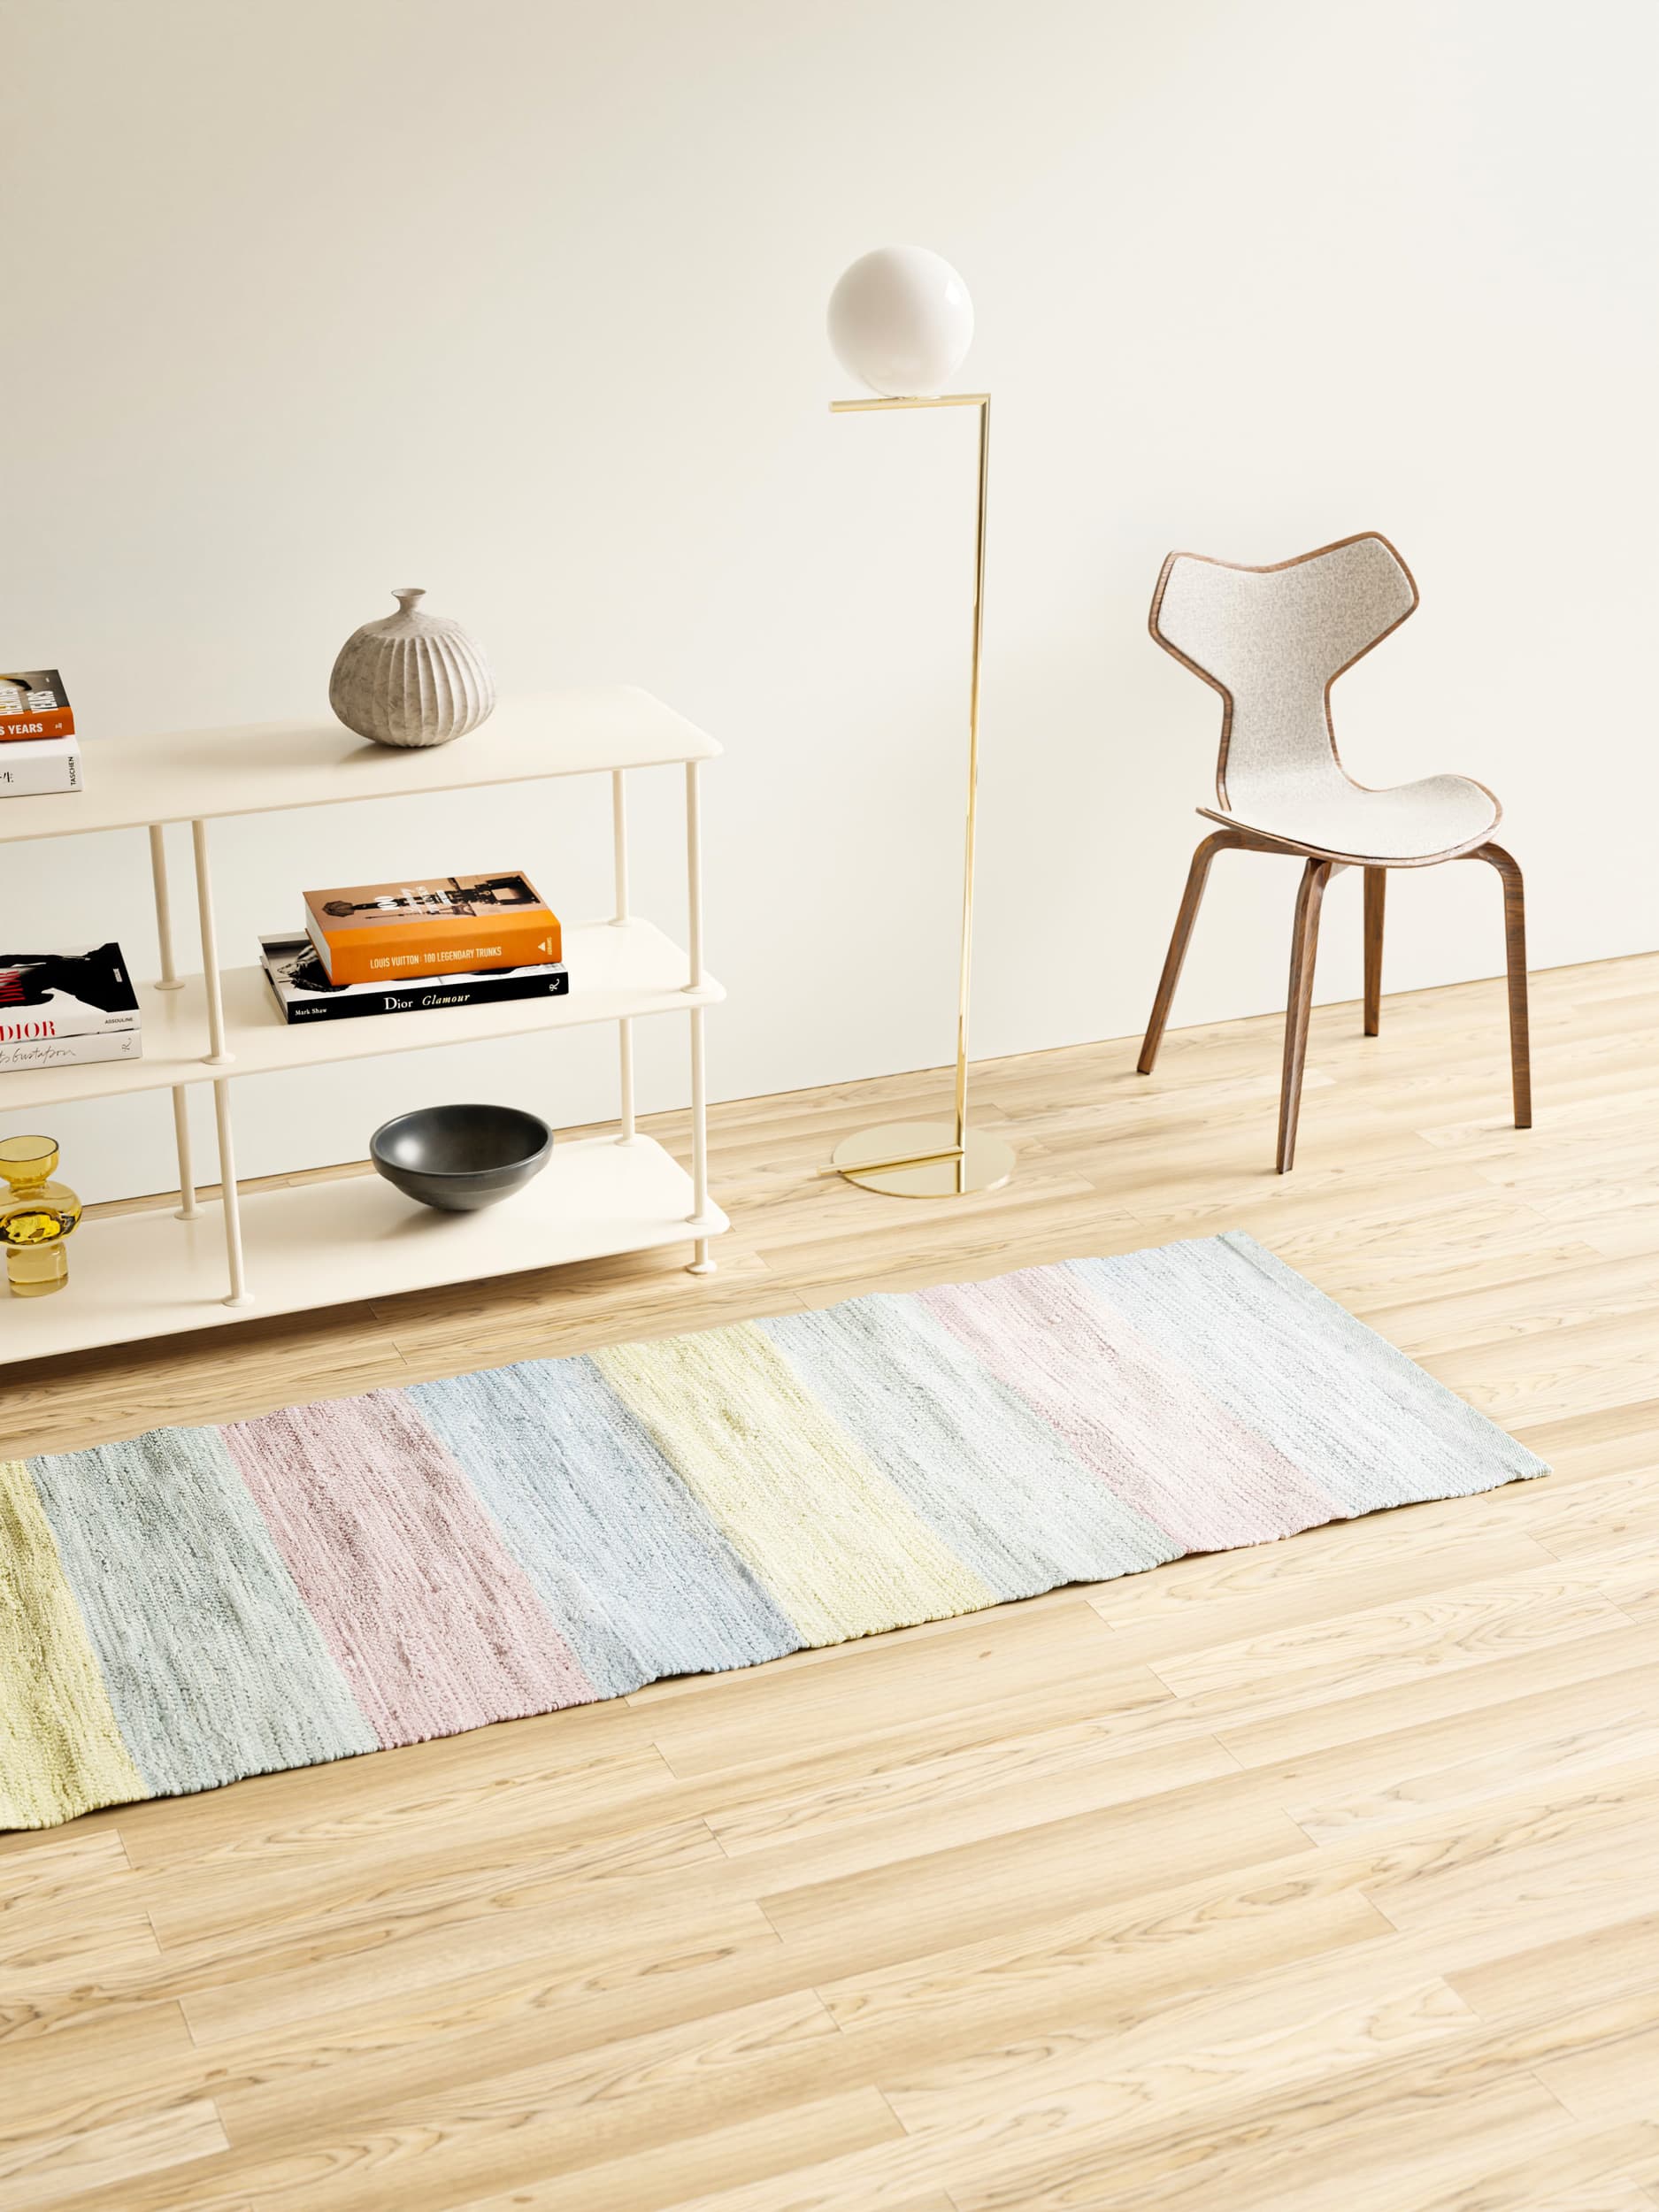 Cotton, Candy – RUG SOLID